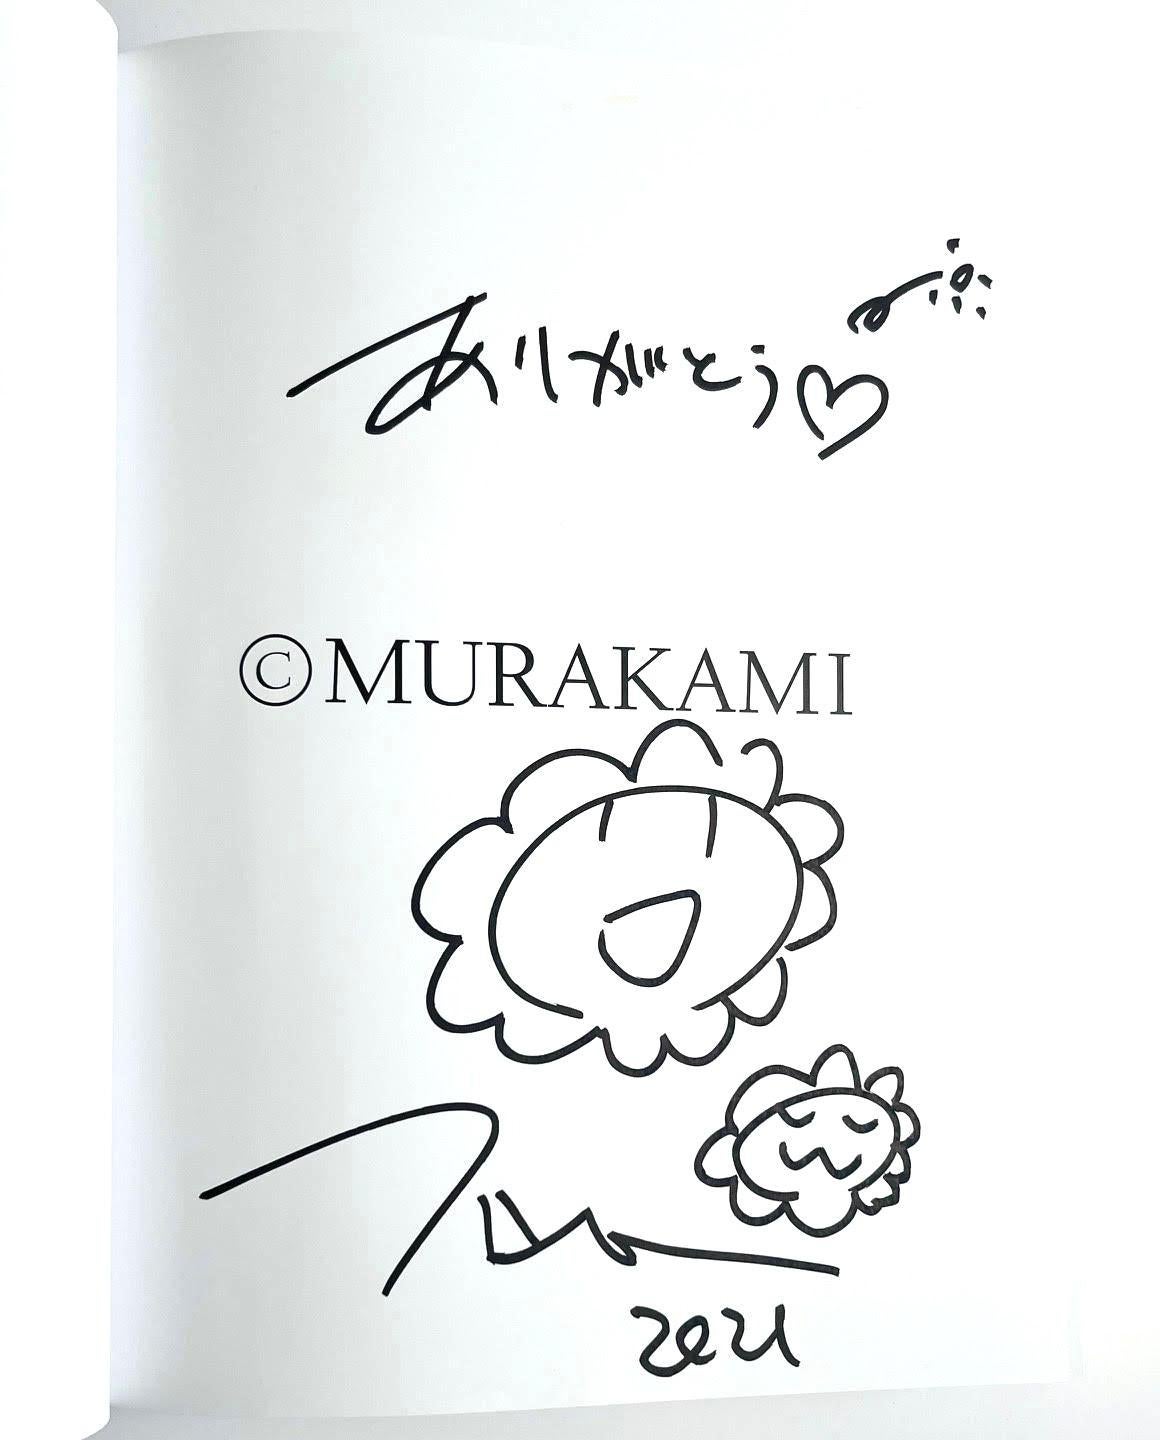 Original signed drawing in book, Two Flowers with heart, inscribed in Japanese  - Pop Art Art by Takashi Murakami